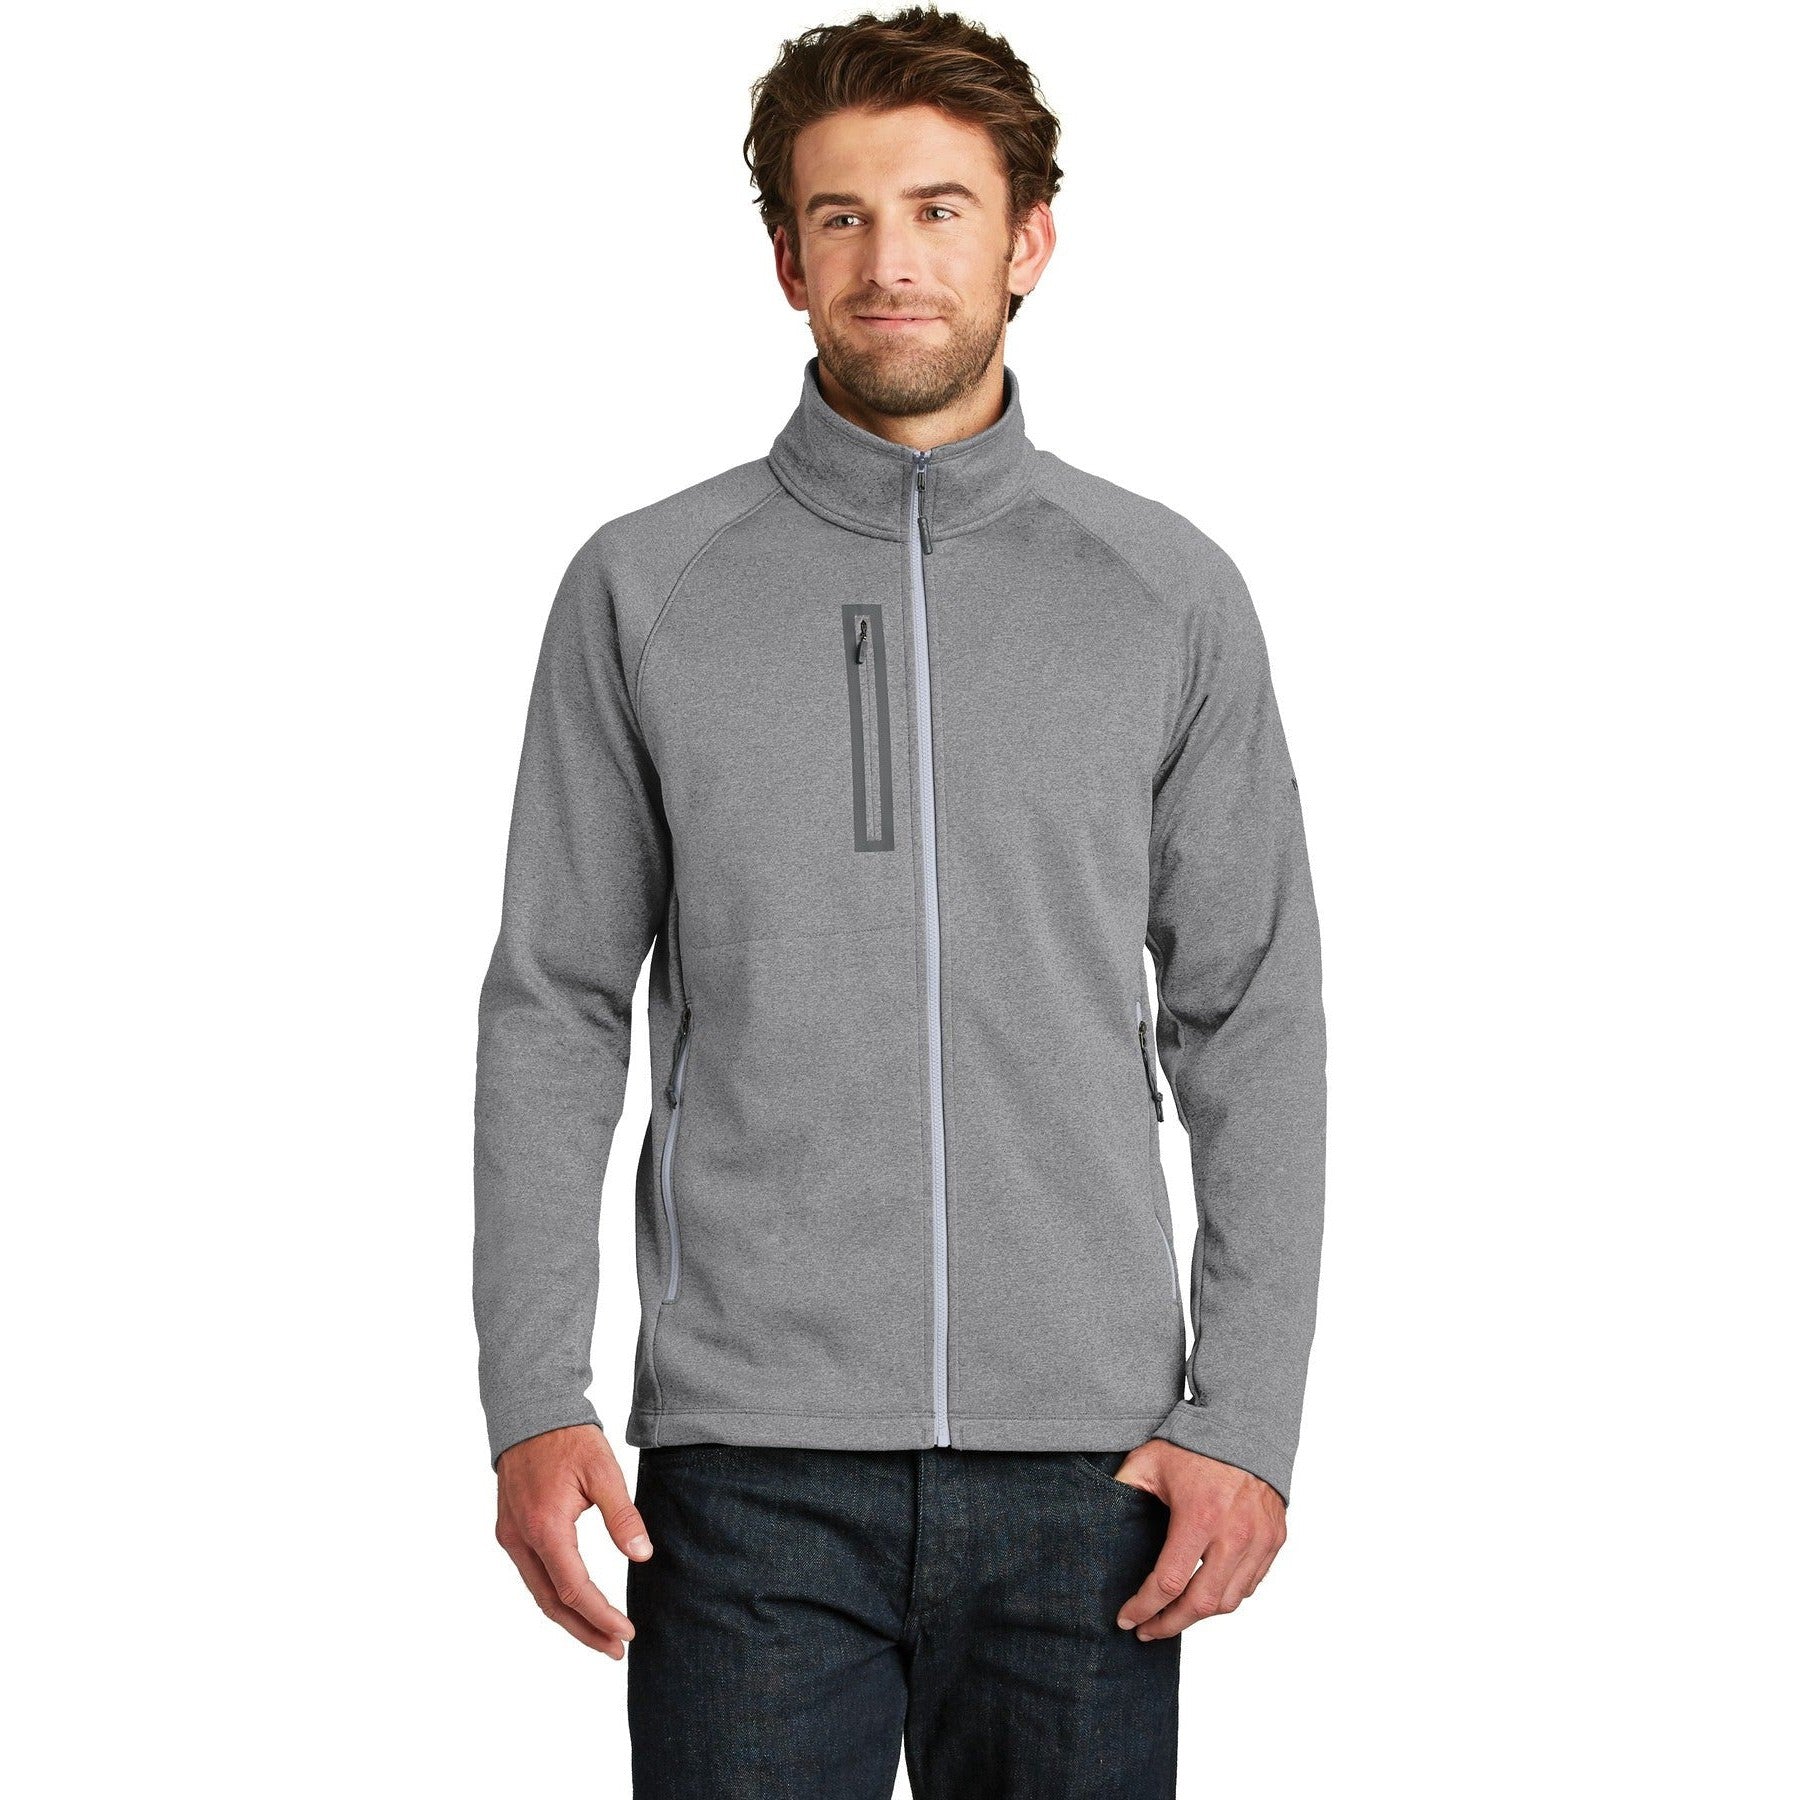 CLOSEOUT - The North Face Canyon Flats Fleece Jacket